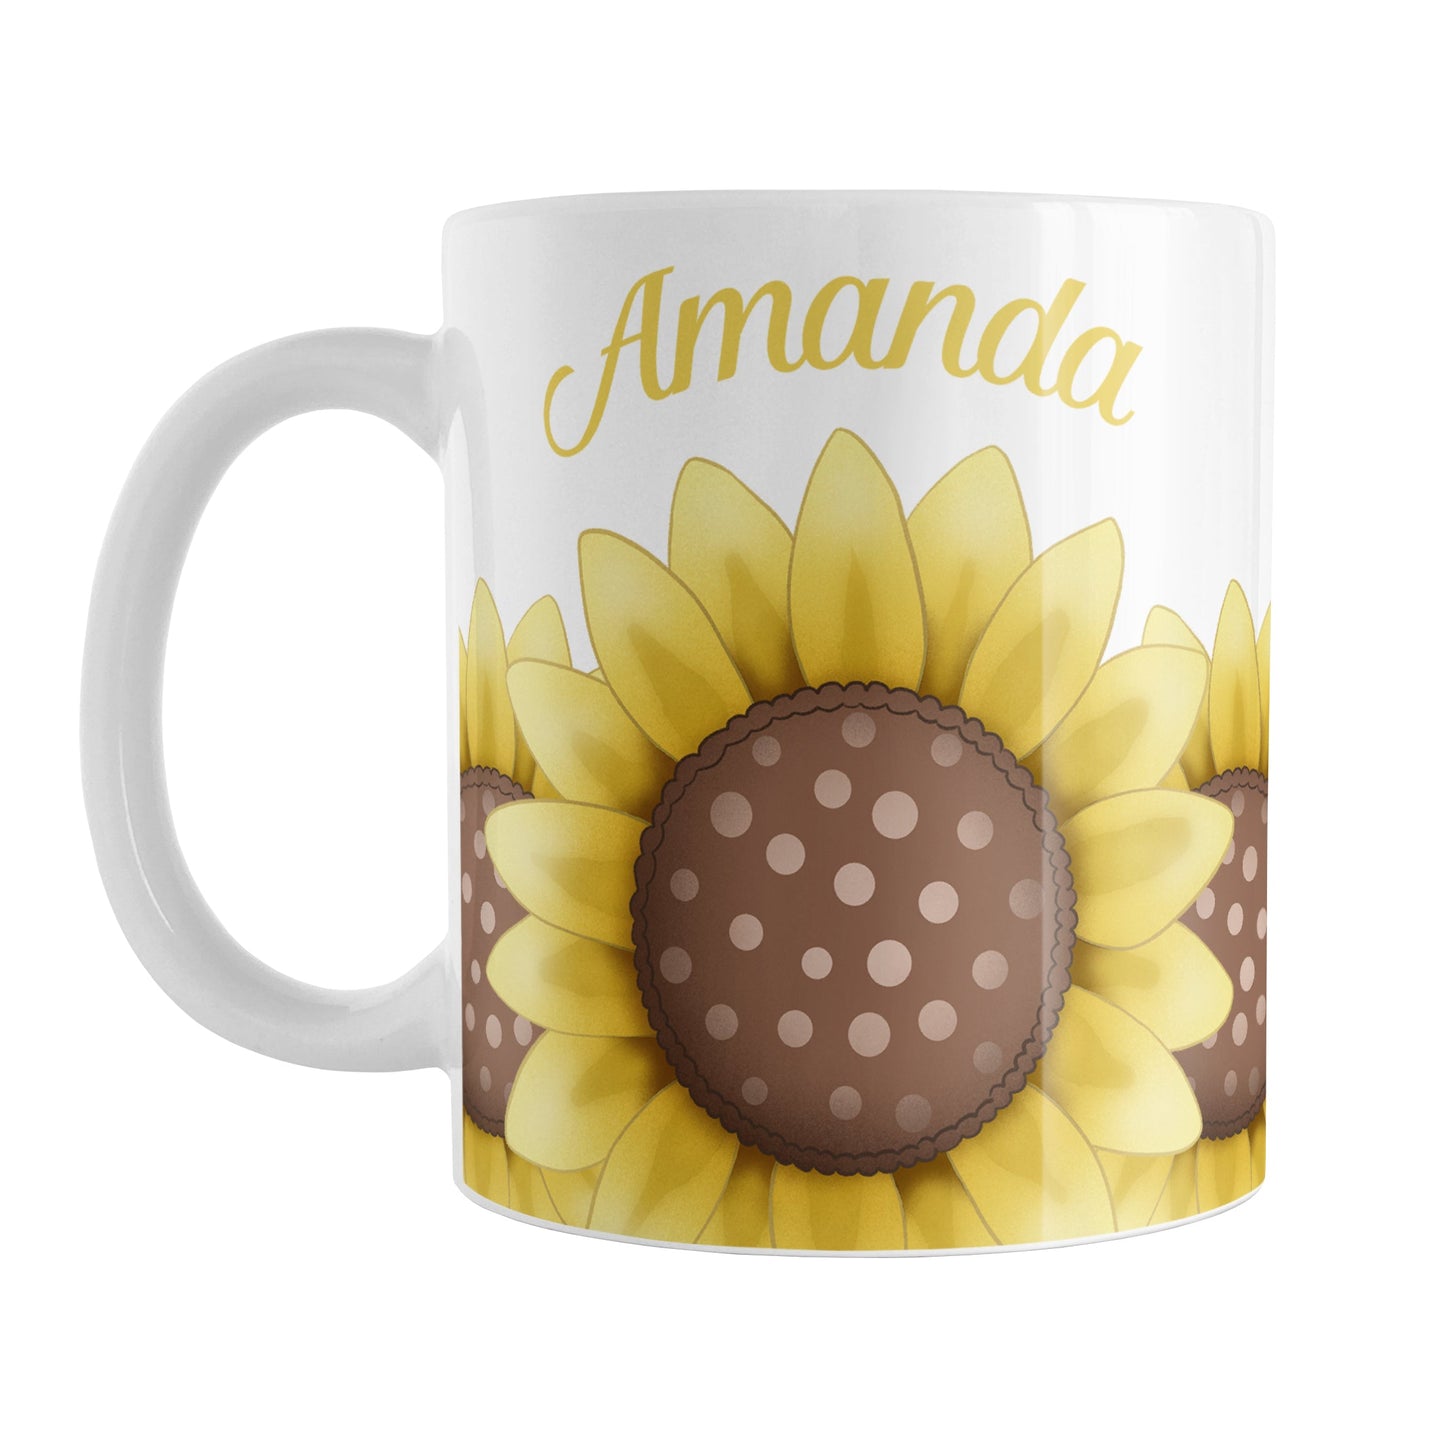 Personalized Sunflower Mug (11oz) at Amy's Coffee Mugs. A ceramic coffee mug designed with an illustration of big yellow sunflowers with a dotted brown centers along the bottom of this floral mug. Your personalized name is custom printed in a curved yellow script font above the sunflowers on both sides of the mug.